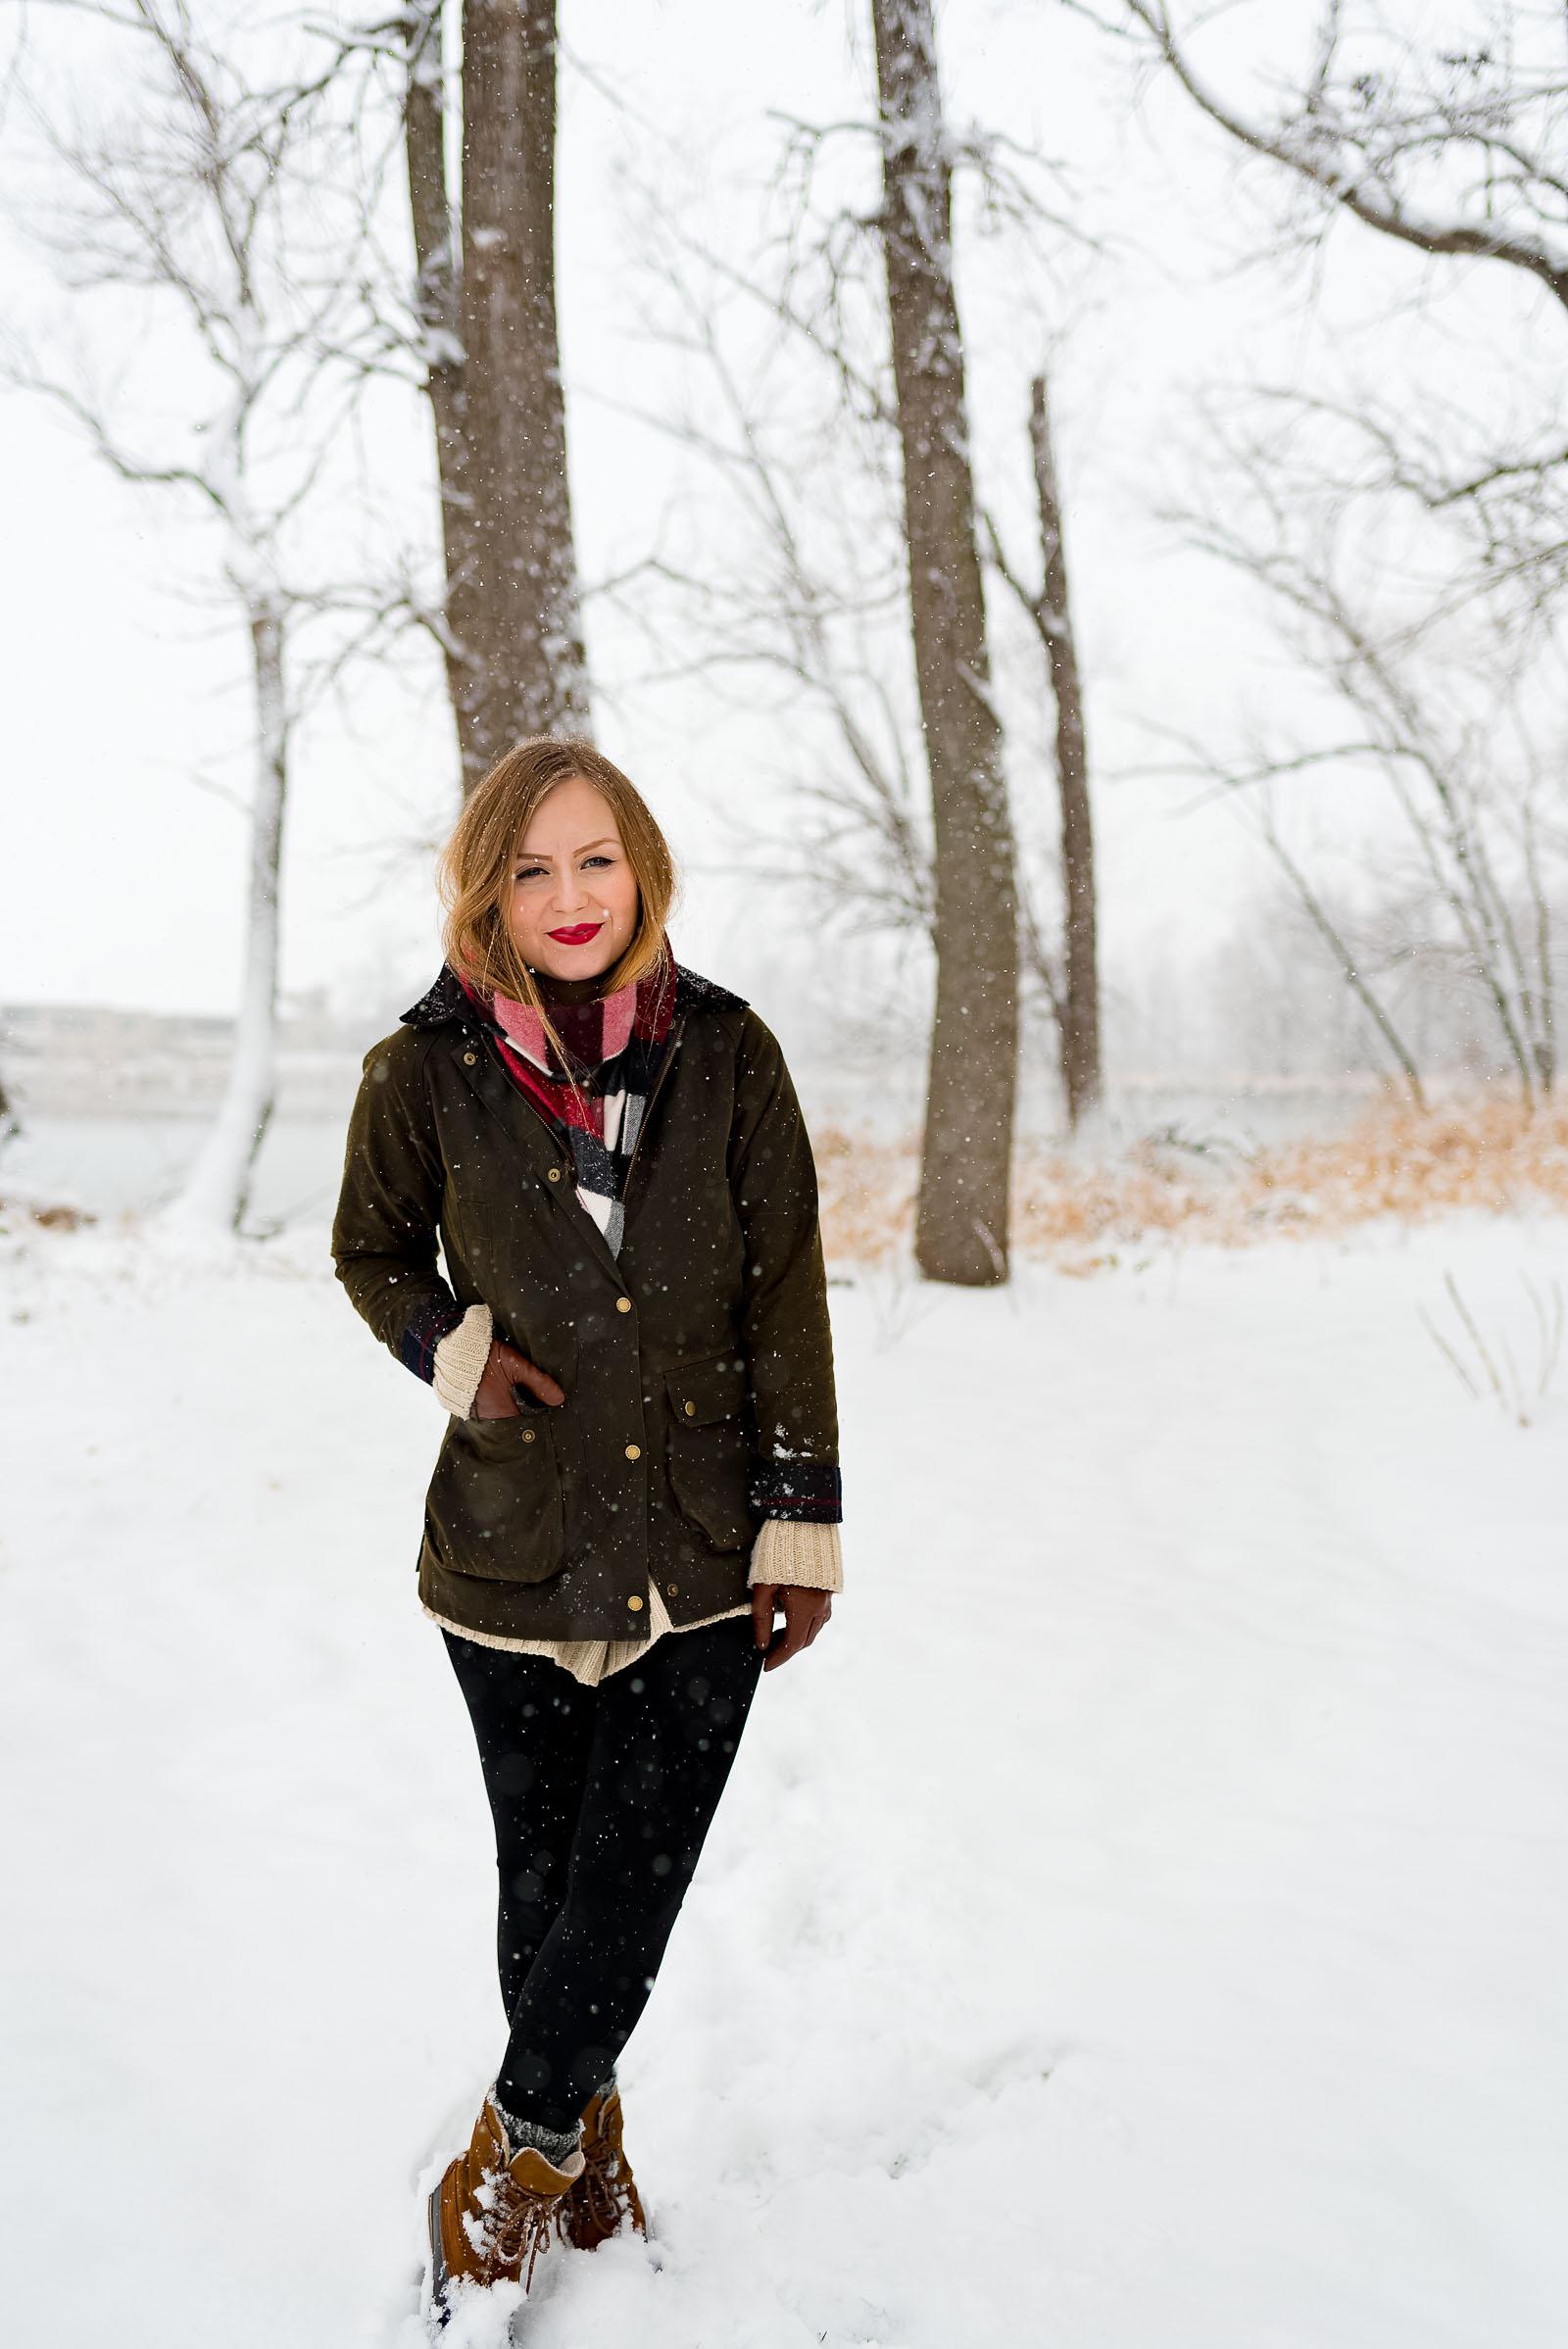 Chic Winter Snow Outfits